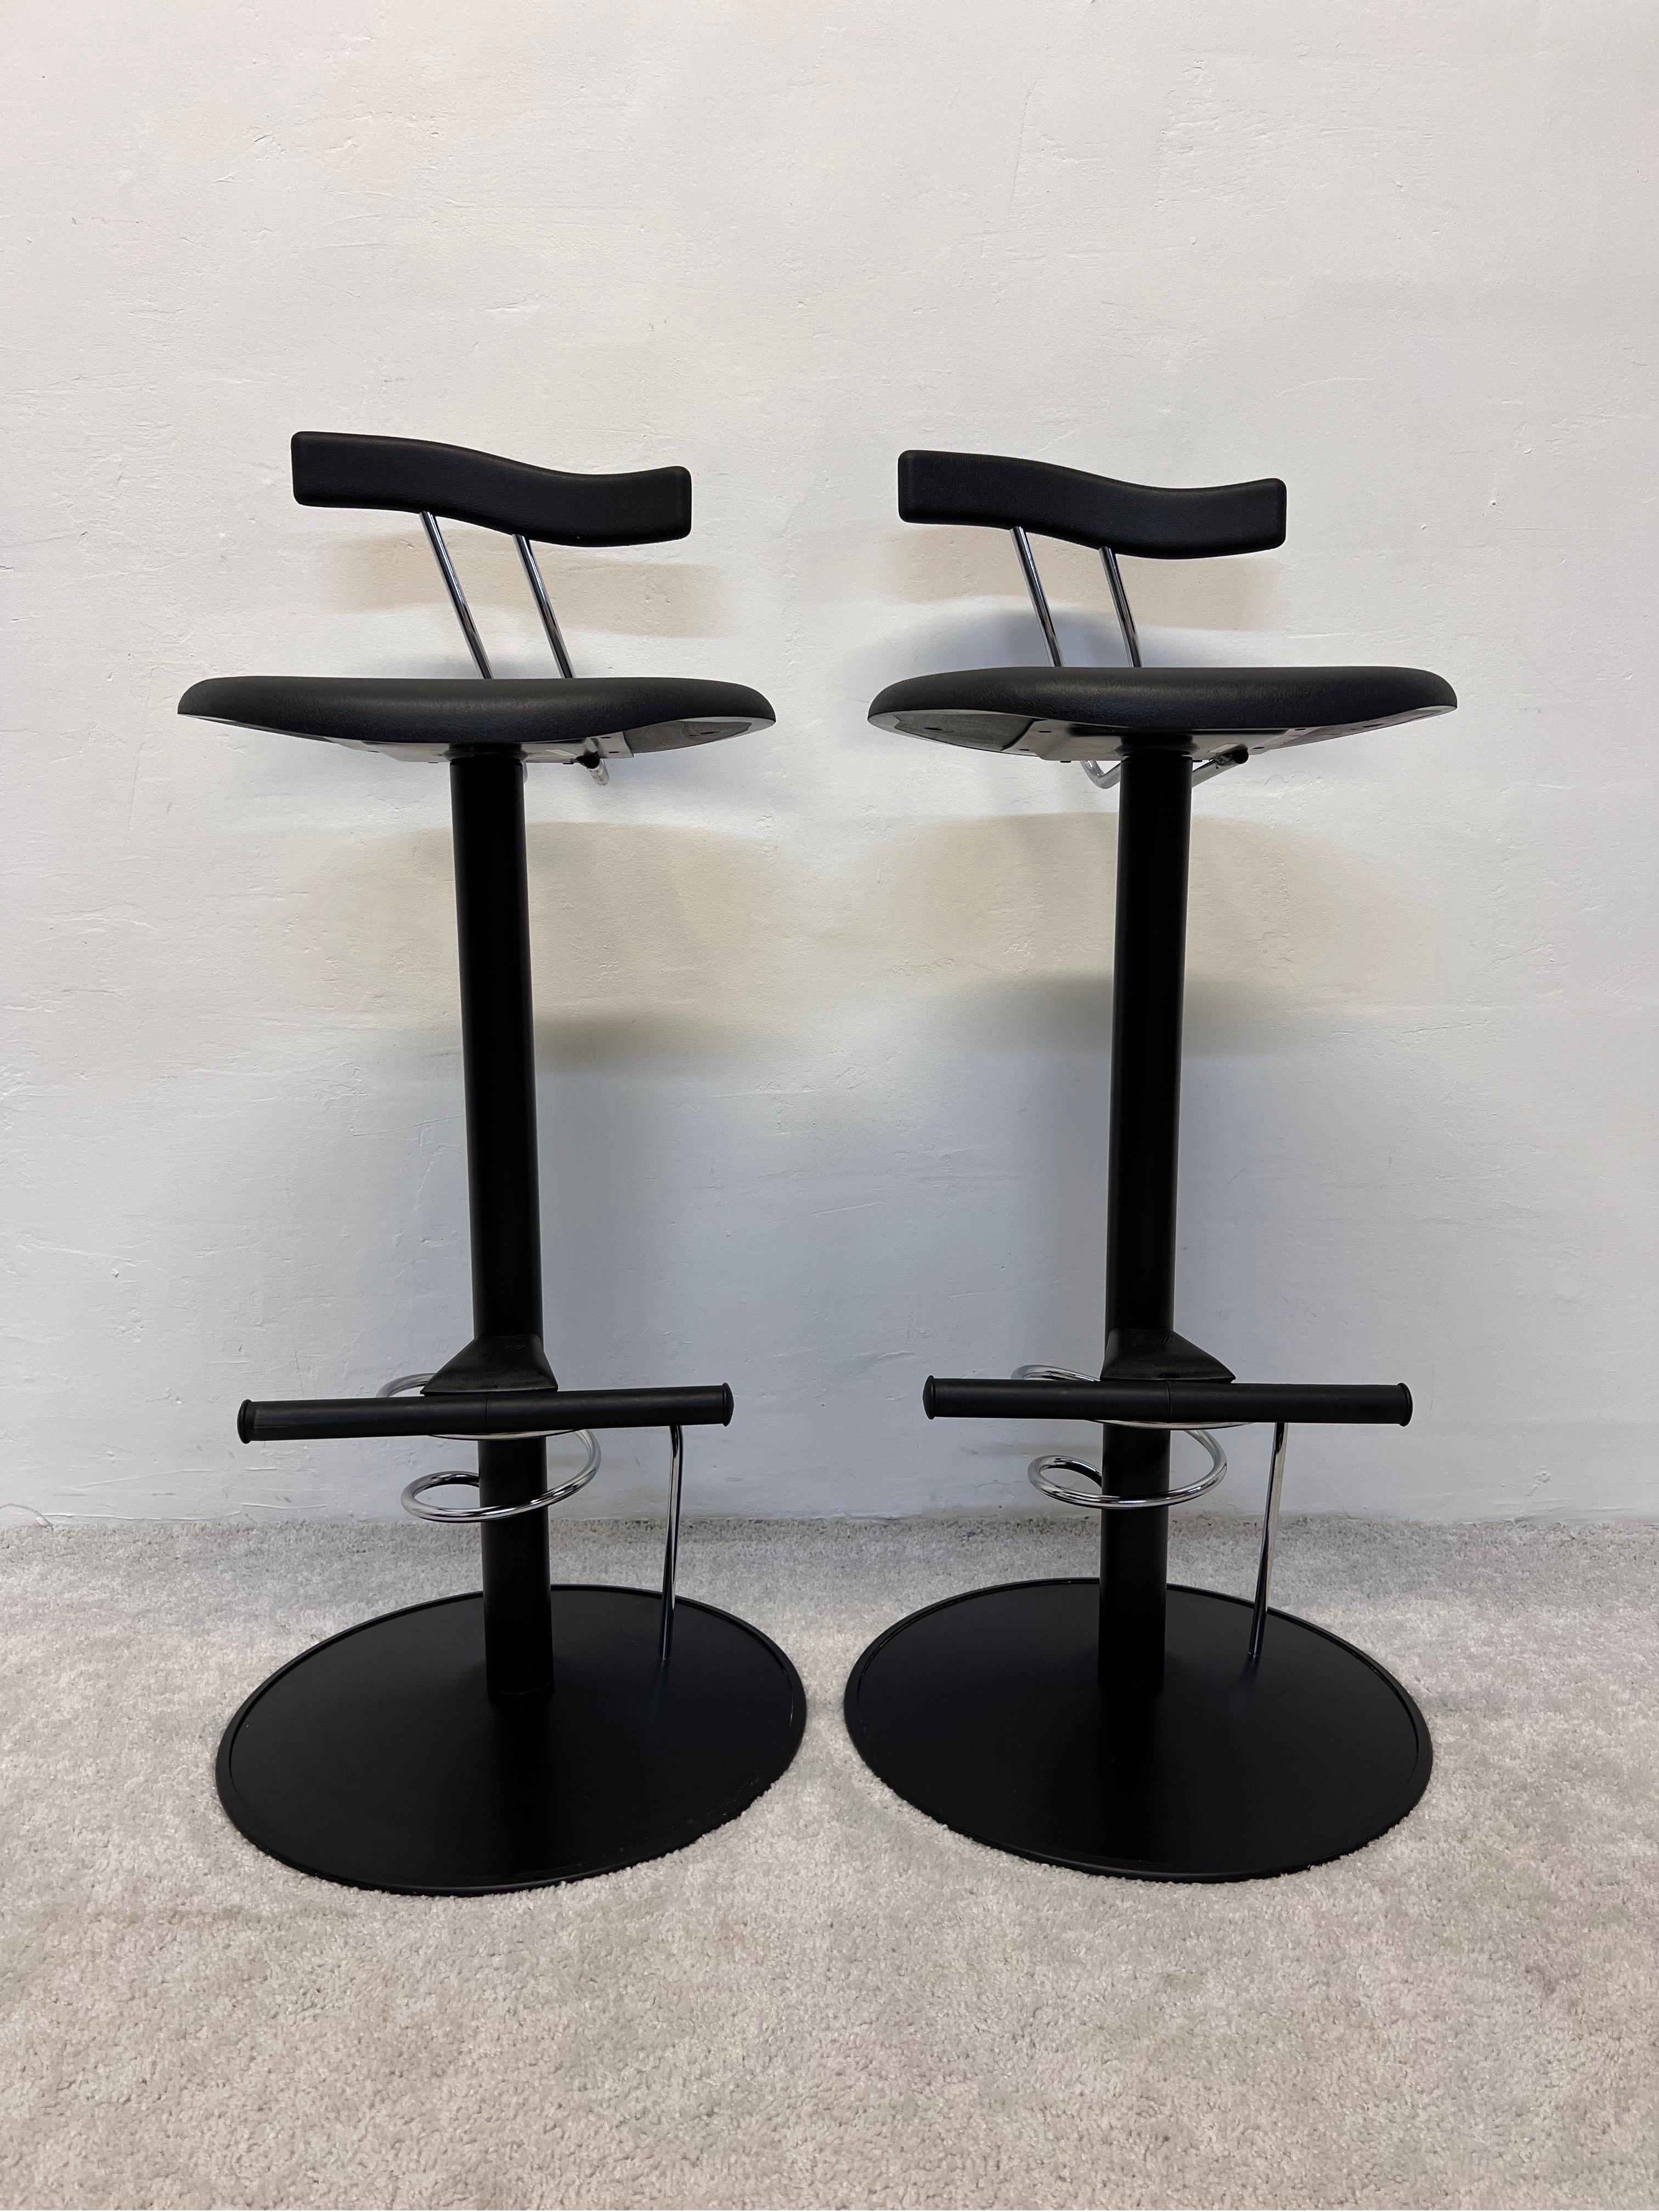 Steel Postmodern Memphis Style Bar Stools, Italy 1980s, a Pair For Sale